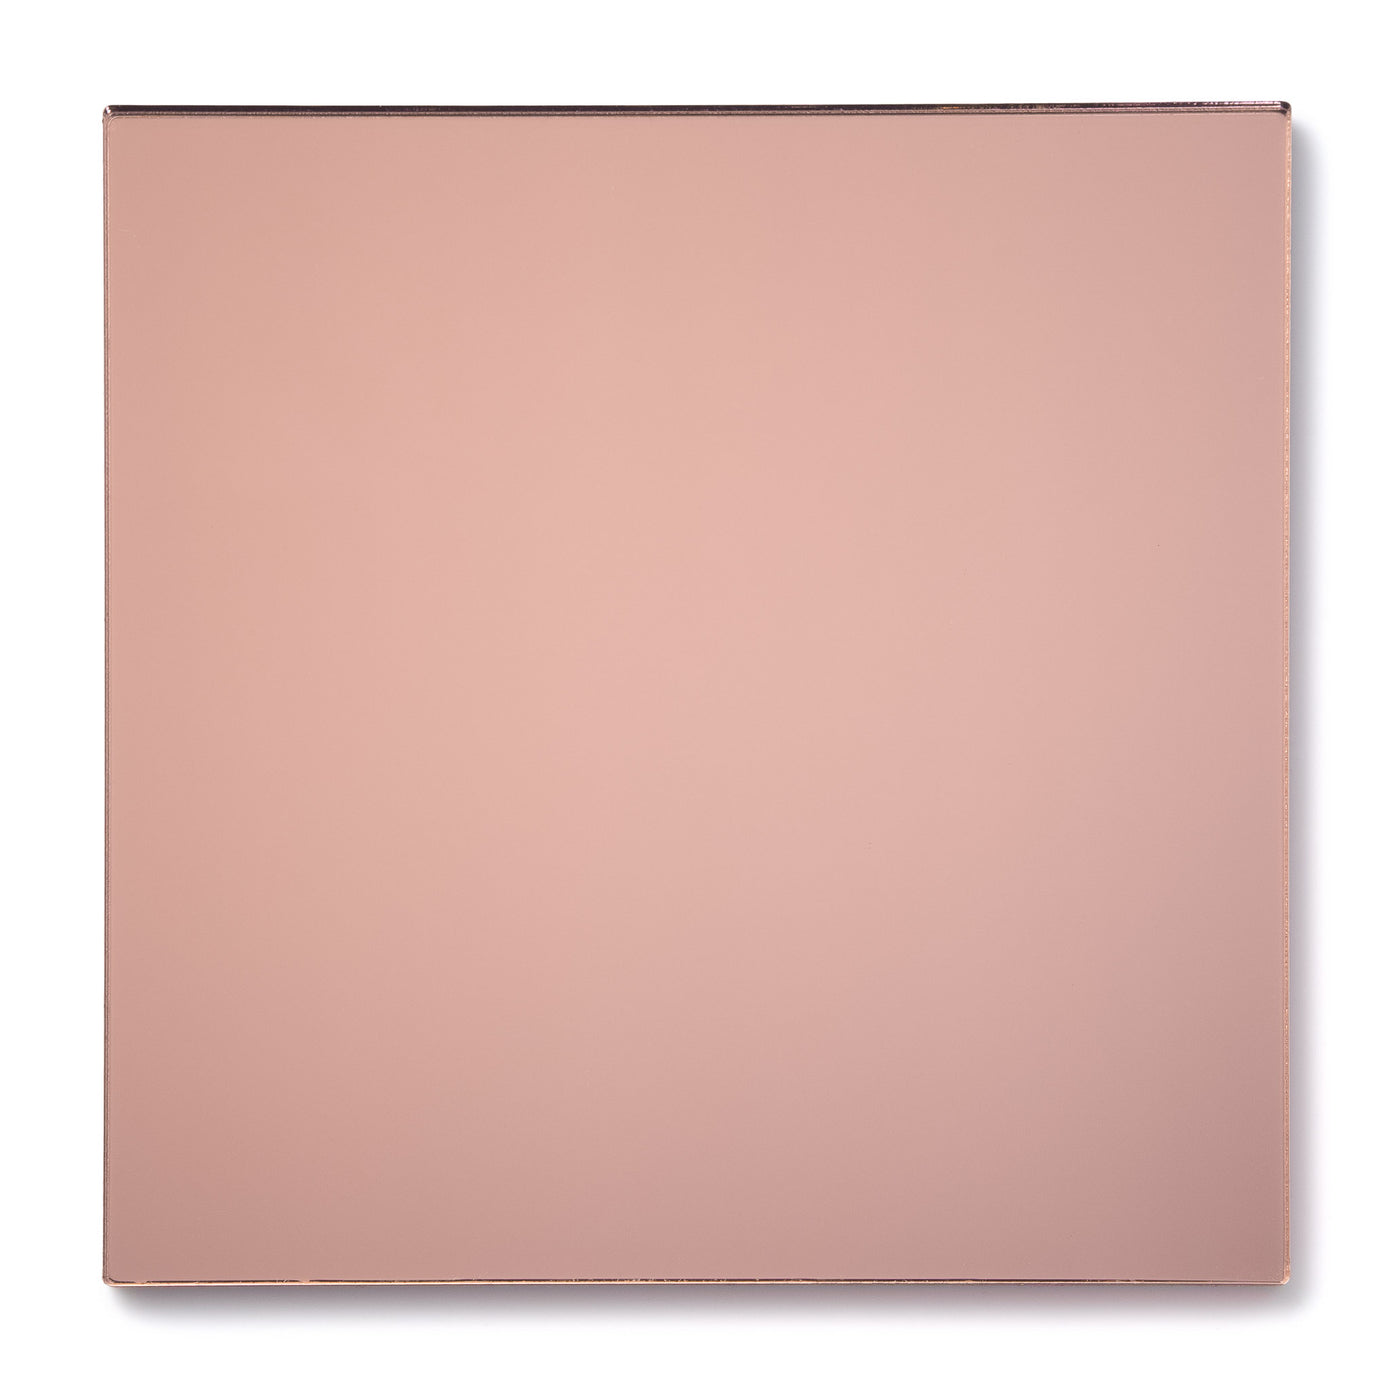 Mirror Acrylic Sheets Gold, Silver, Bronze, Bright Copper, Rose Gold, Grey,  3mm